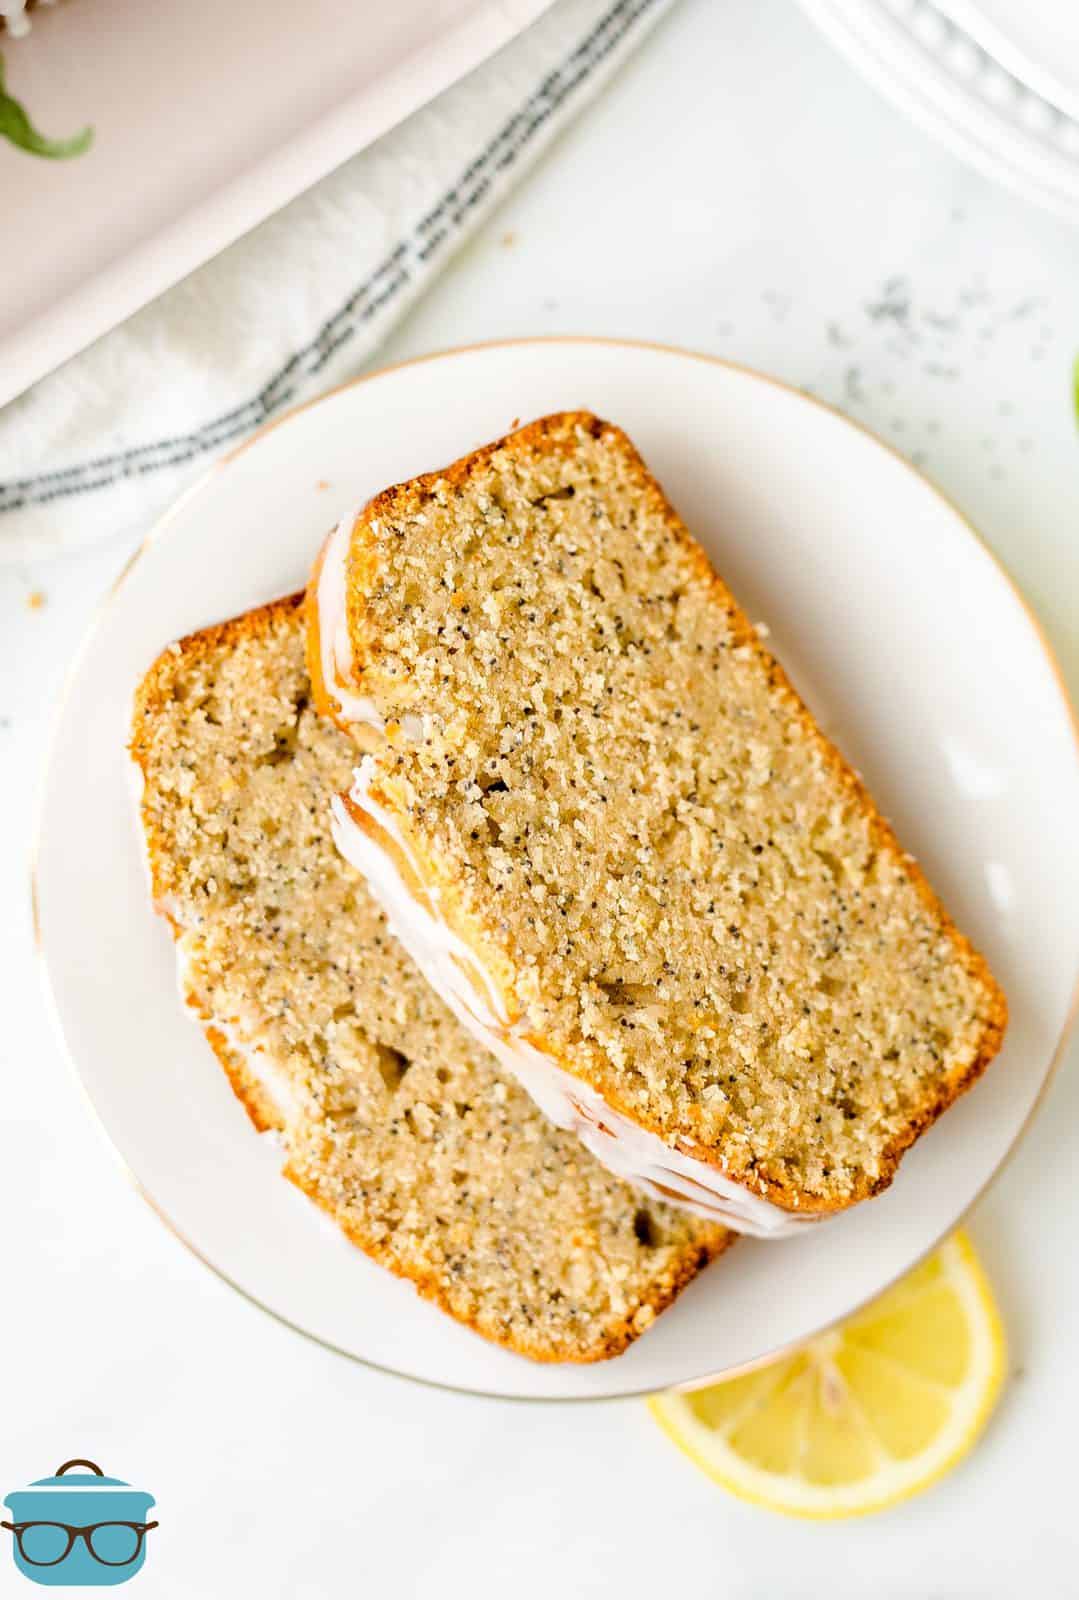 Overhead of two slices of Lemon Poppy Seed Bread on plate.